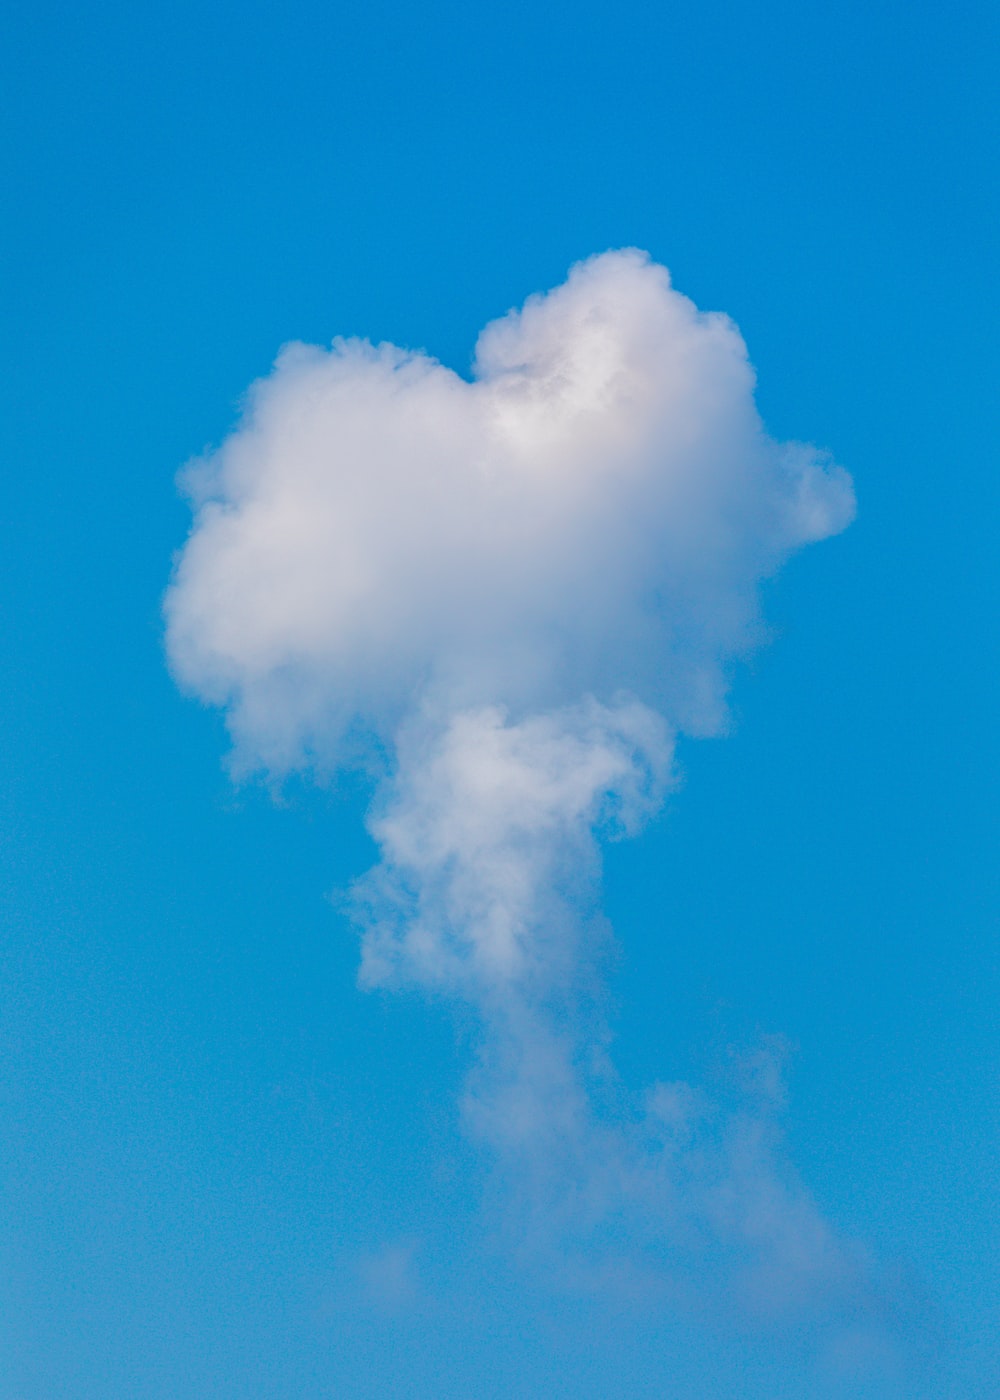 Heart Cloud Picture. Download Free Image